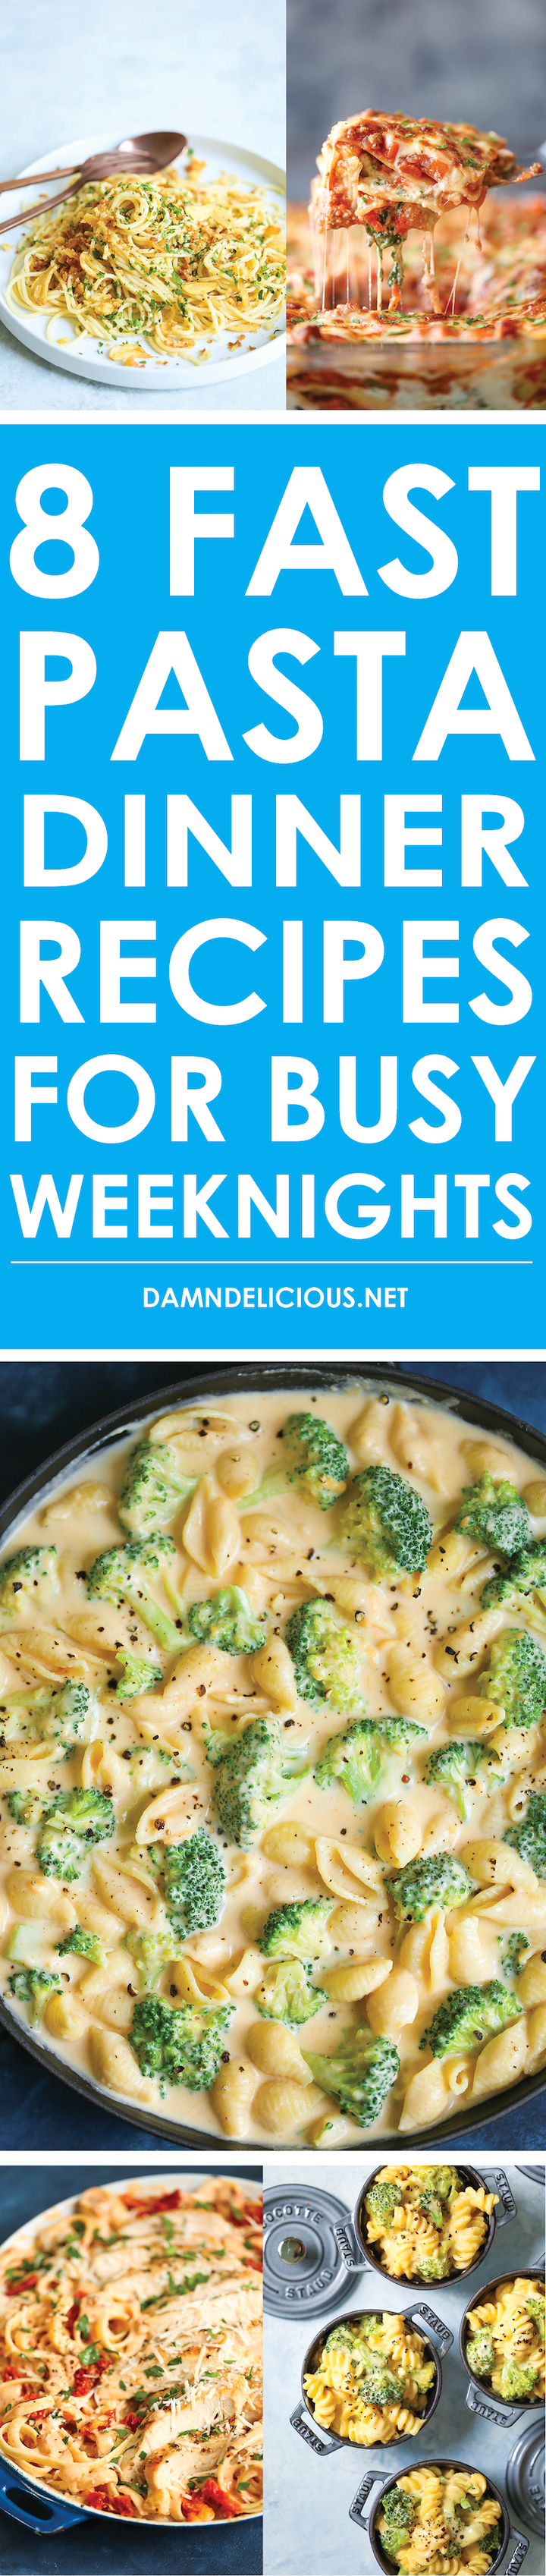 8 Fast Pasta Dinner Recipes for Busy Weeknights - Damn Delicious